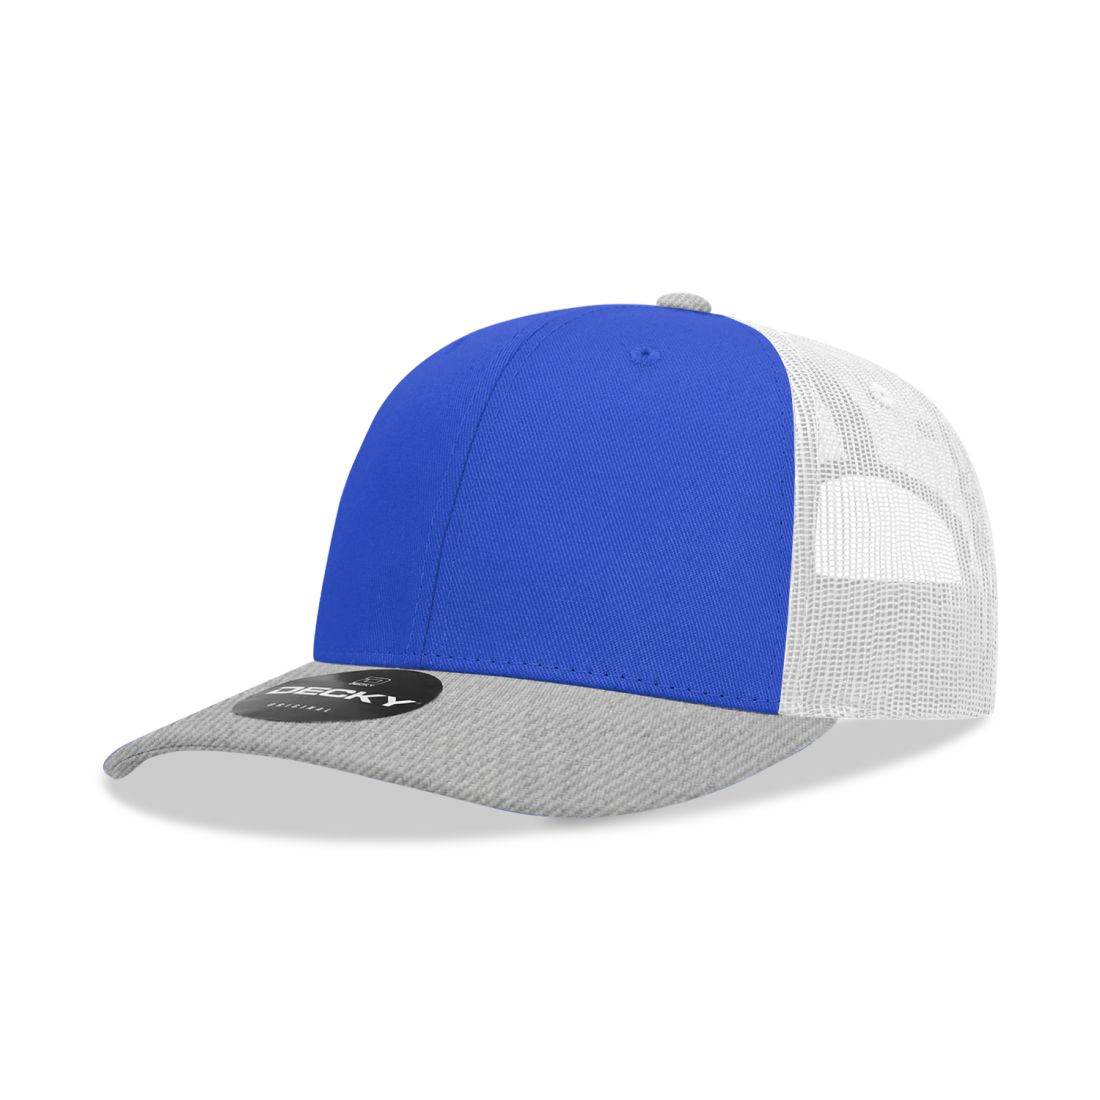 Heaher Grey/Royal/White color variant